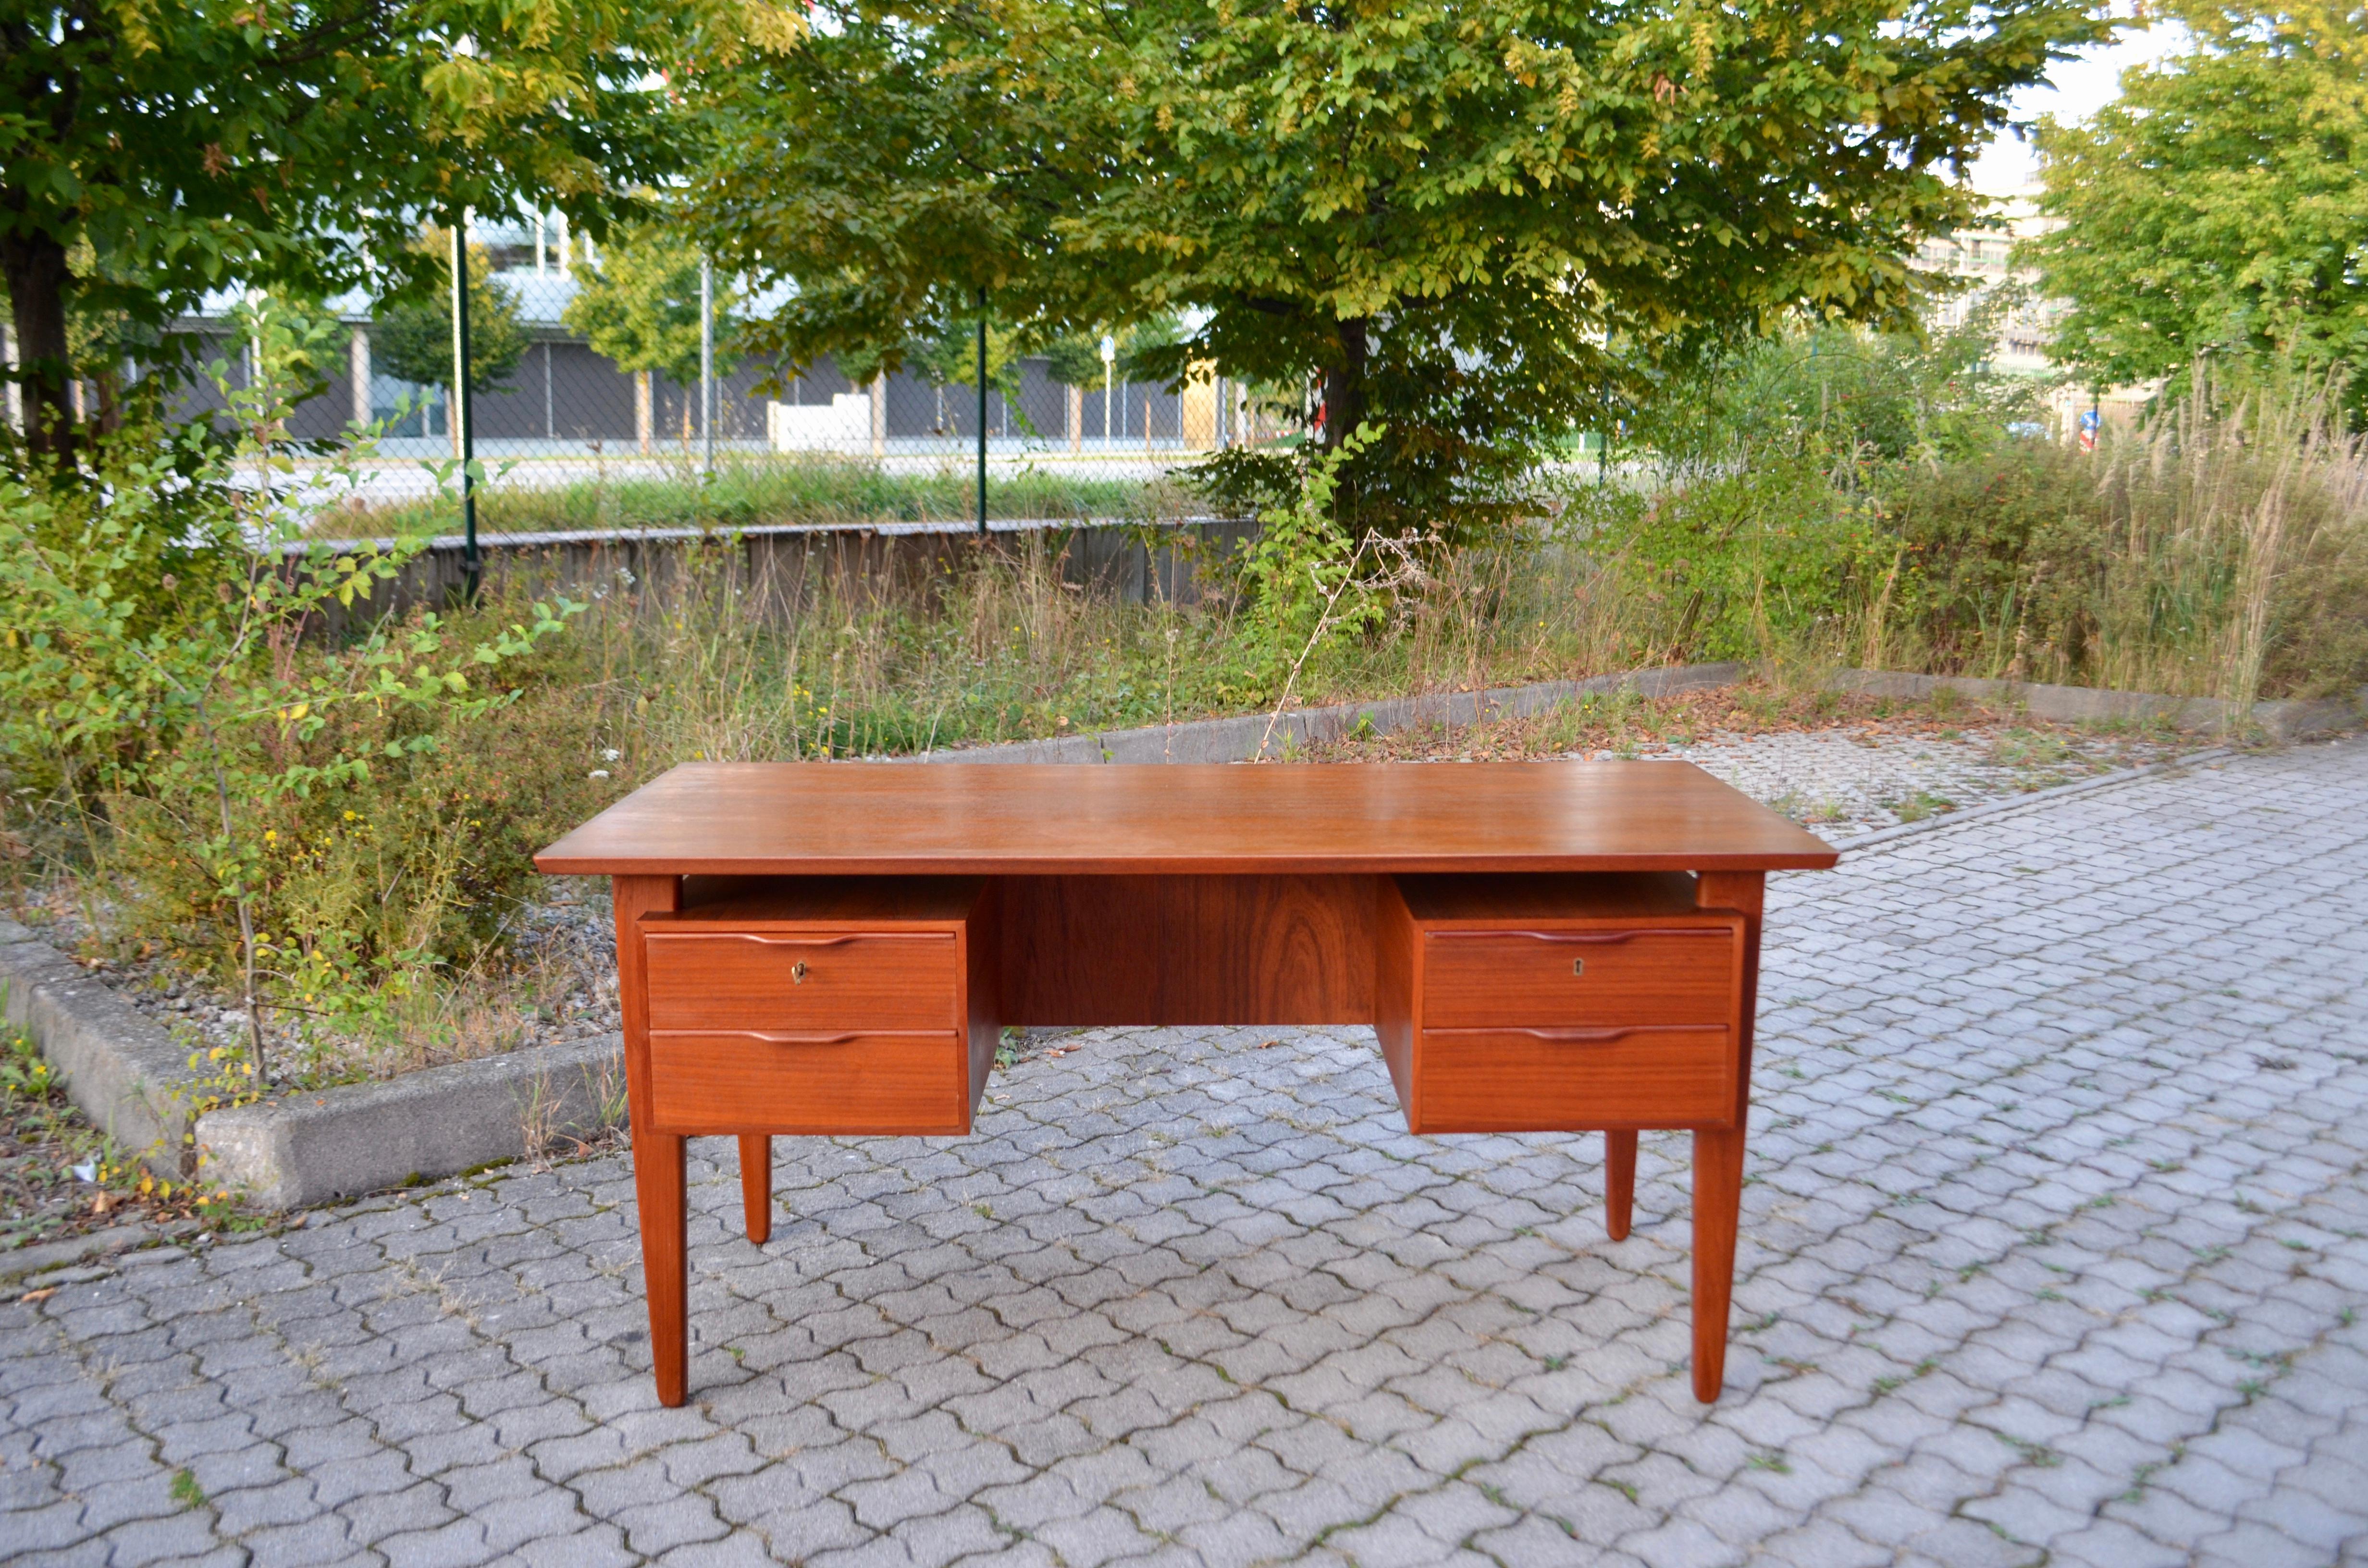 Rare Danish Modern desk by Henning Jorgensen for Fredericia Mobelfabrik, 1960.Not confuse with Fredericia Stolefabrik.
It is in oiled teak.
Sculptural design.
Minimal thin handles on the drawers.
2 Drawers on the each side with brass keys.
A